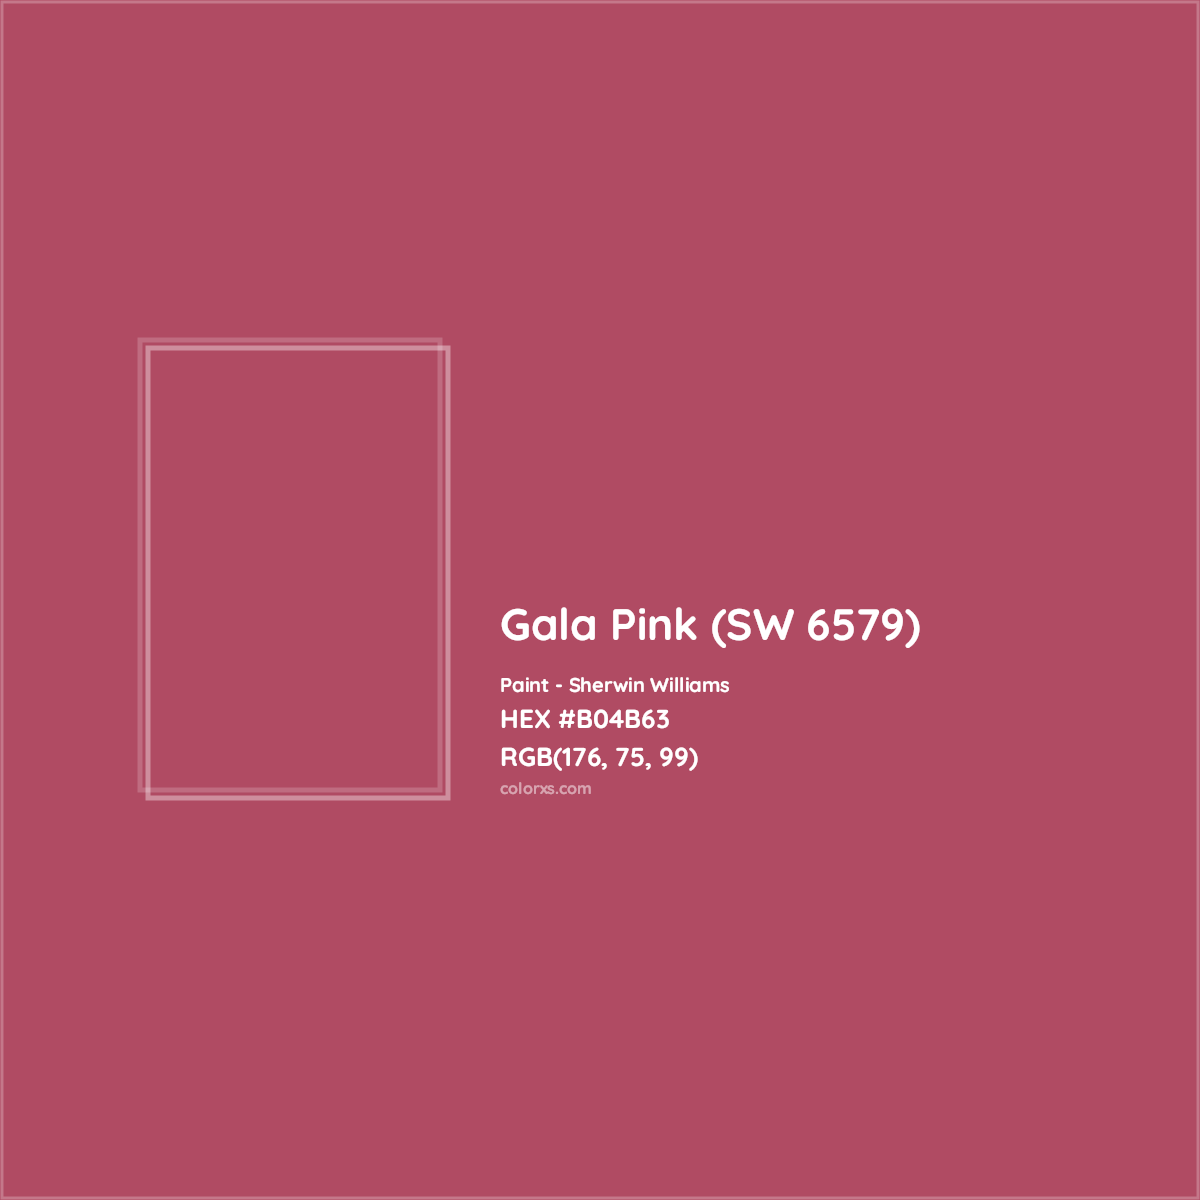 HEX #B04B63 Gala Pink (SW 6579) Paint Sherwin Williams - Color Code